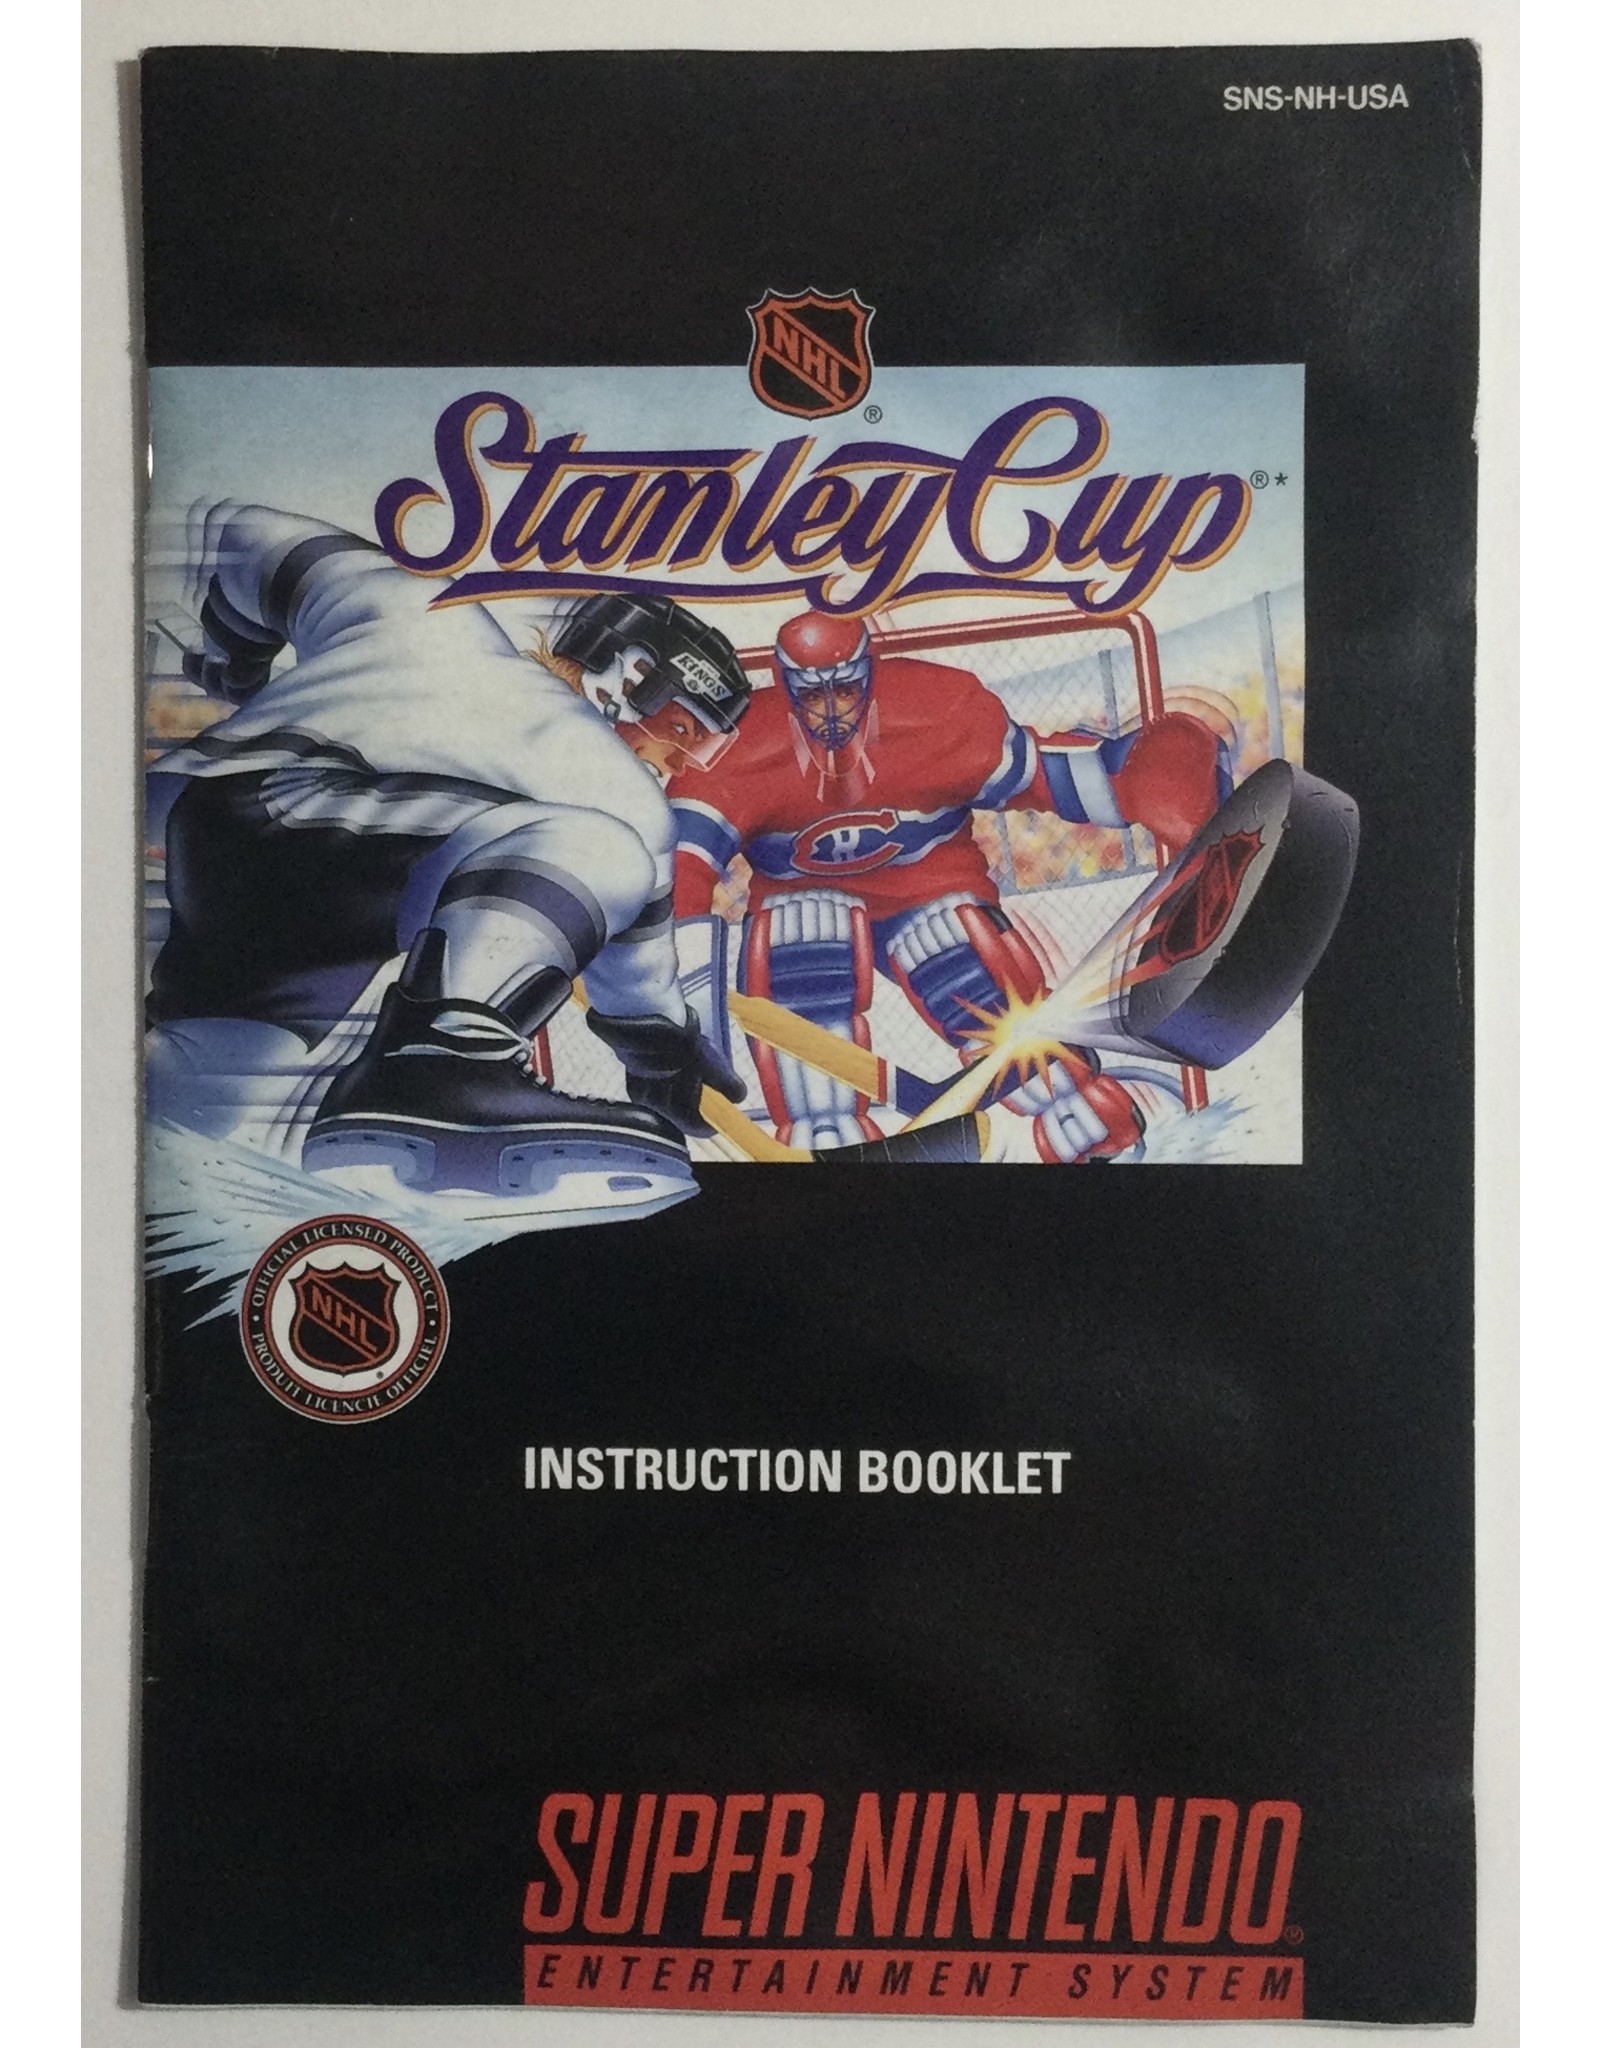 NHL Stanley Cup for Super Nintendo Entertainment System (SNES) - CIB